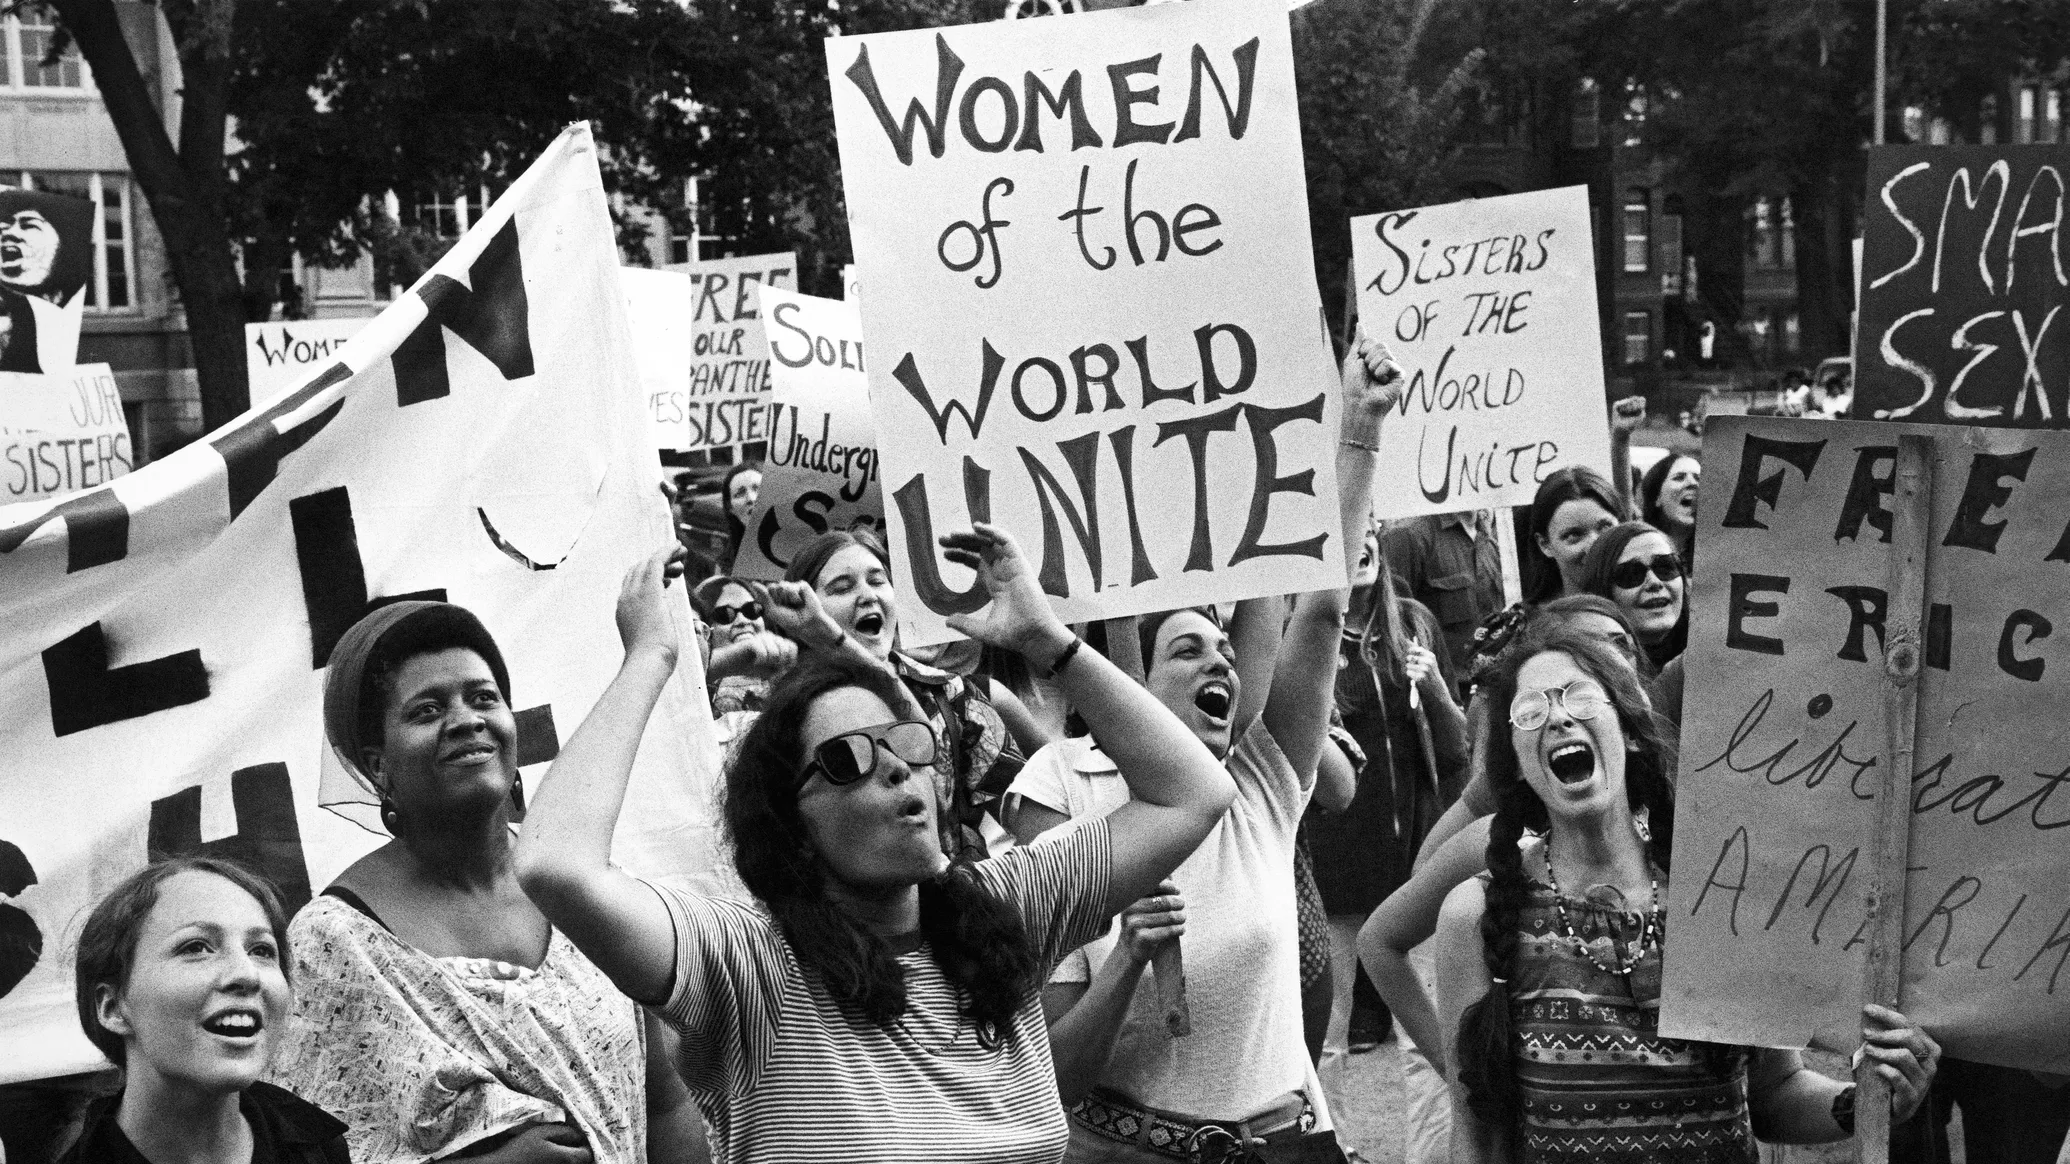 A group of second wave feminists holding signs at a protest.